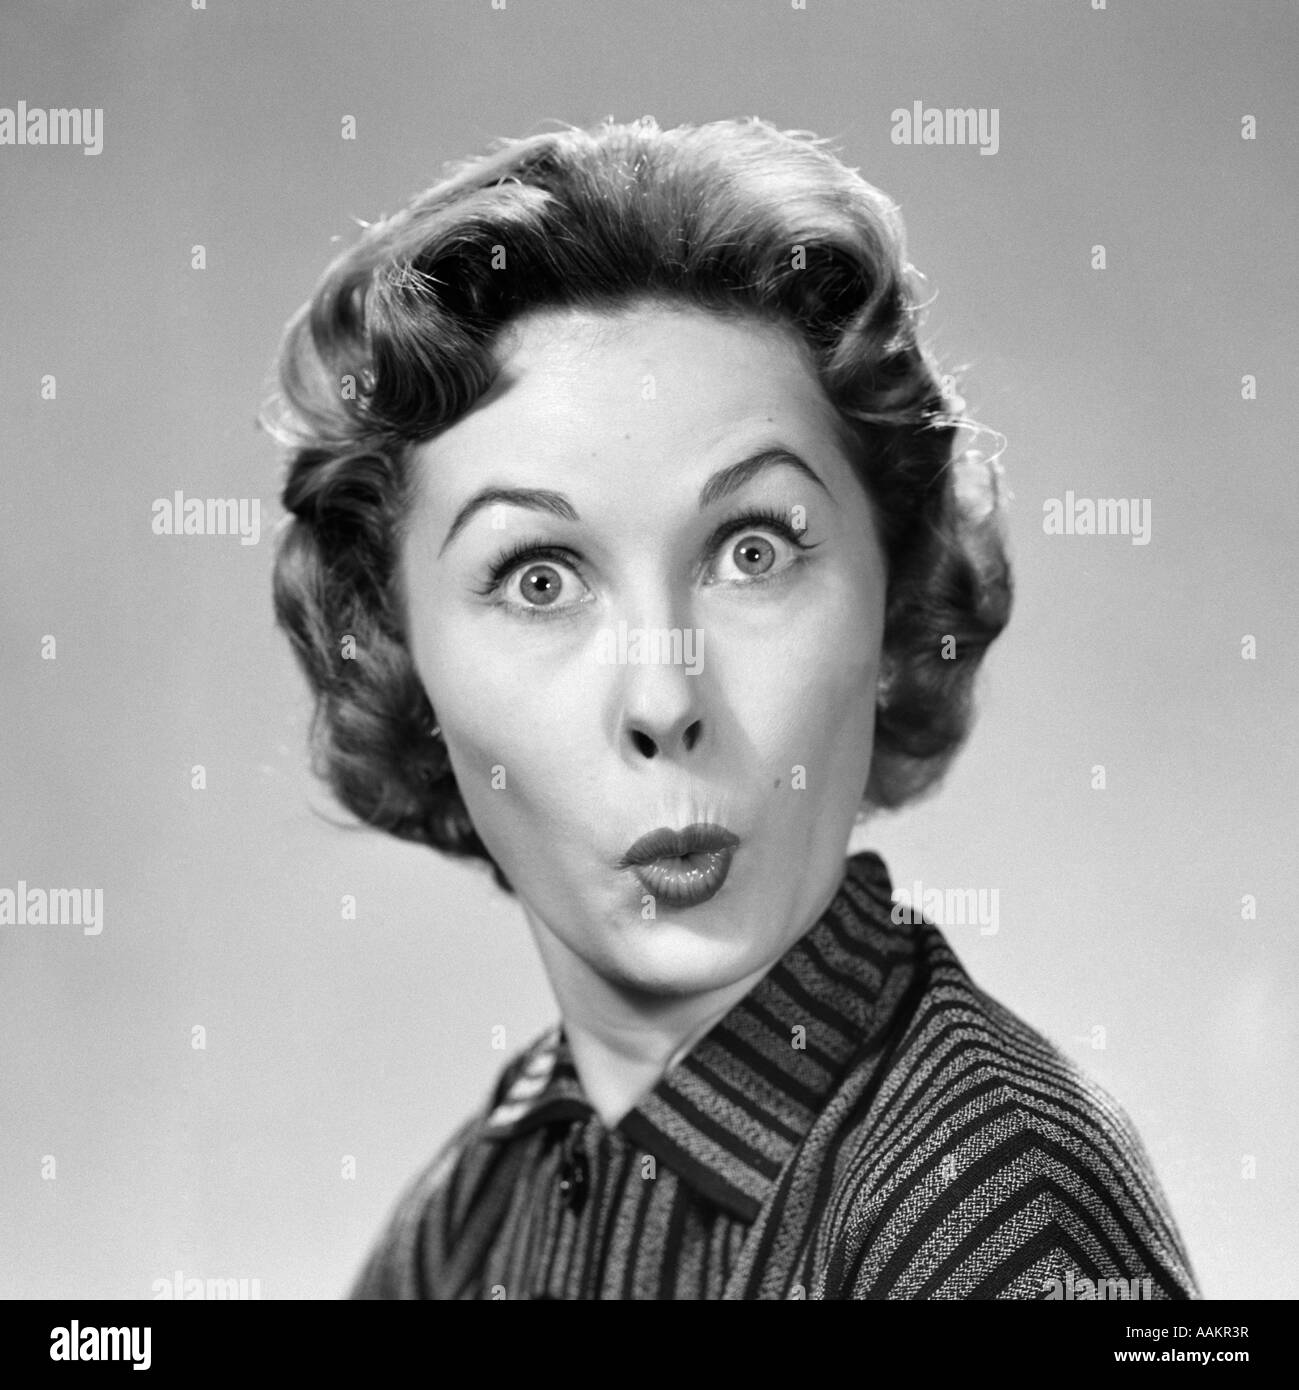 1950s WOMAN MAKING FUNNY FACE EYES WIDE LIPS PURSED AS IN A KISS OR A WHISTLE LOOKING AT CAMERA Stock Photo